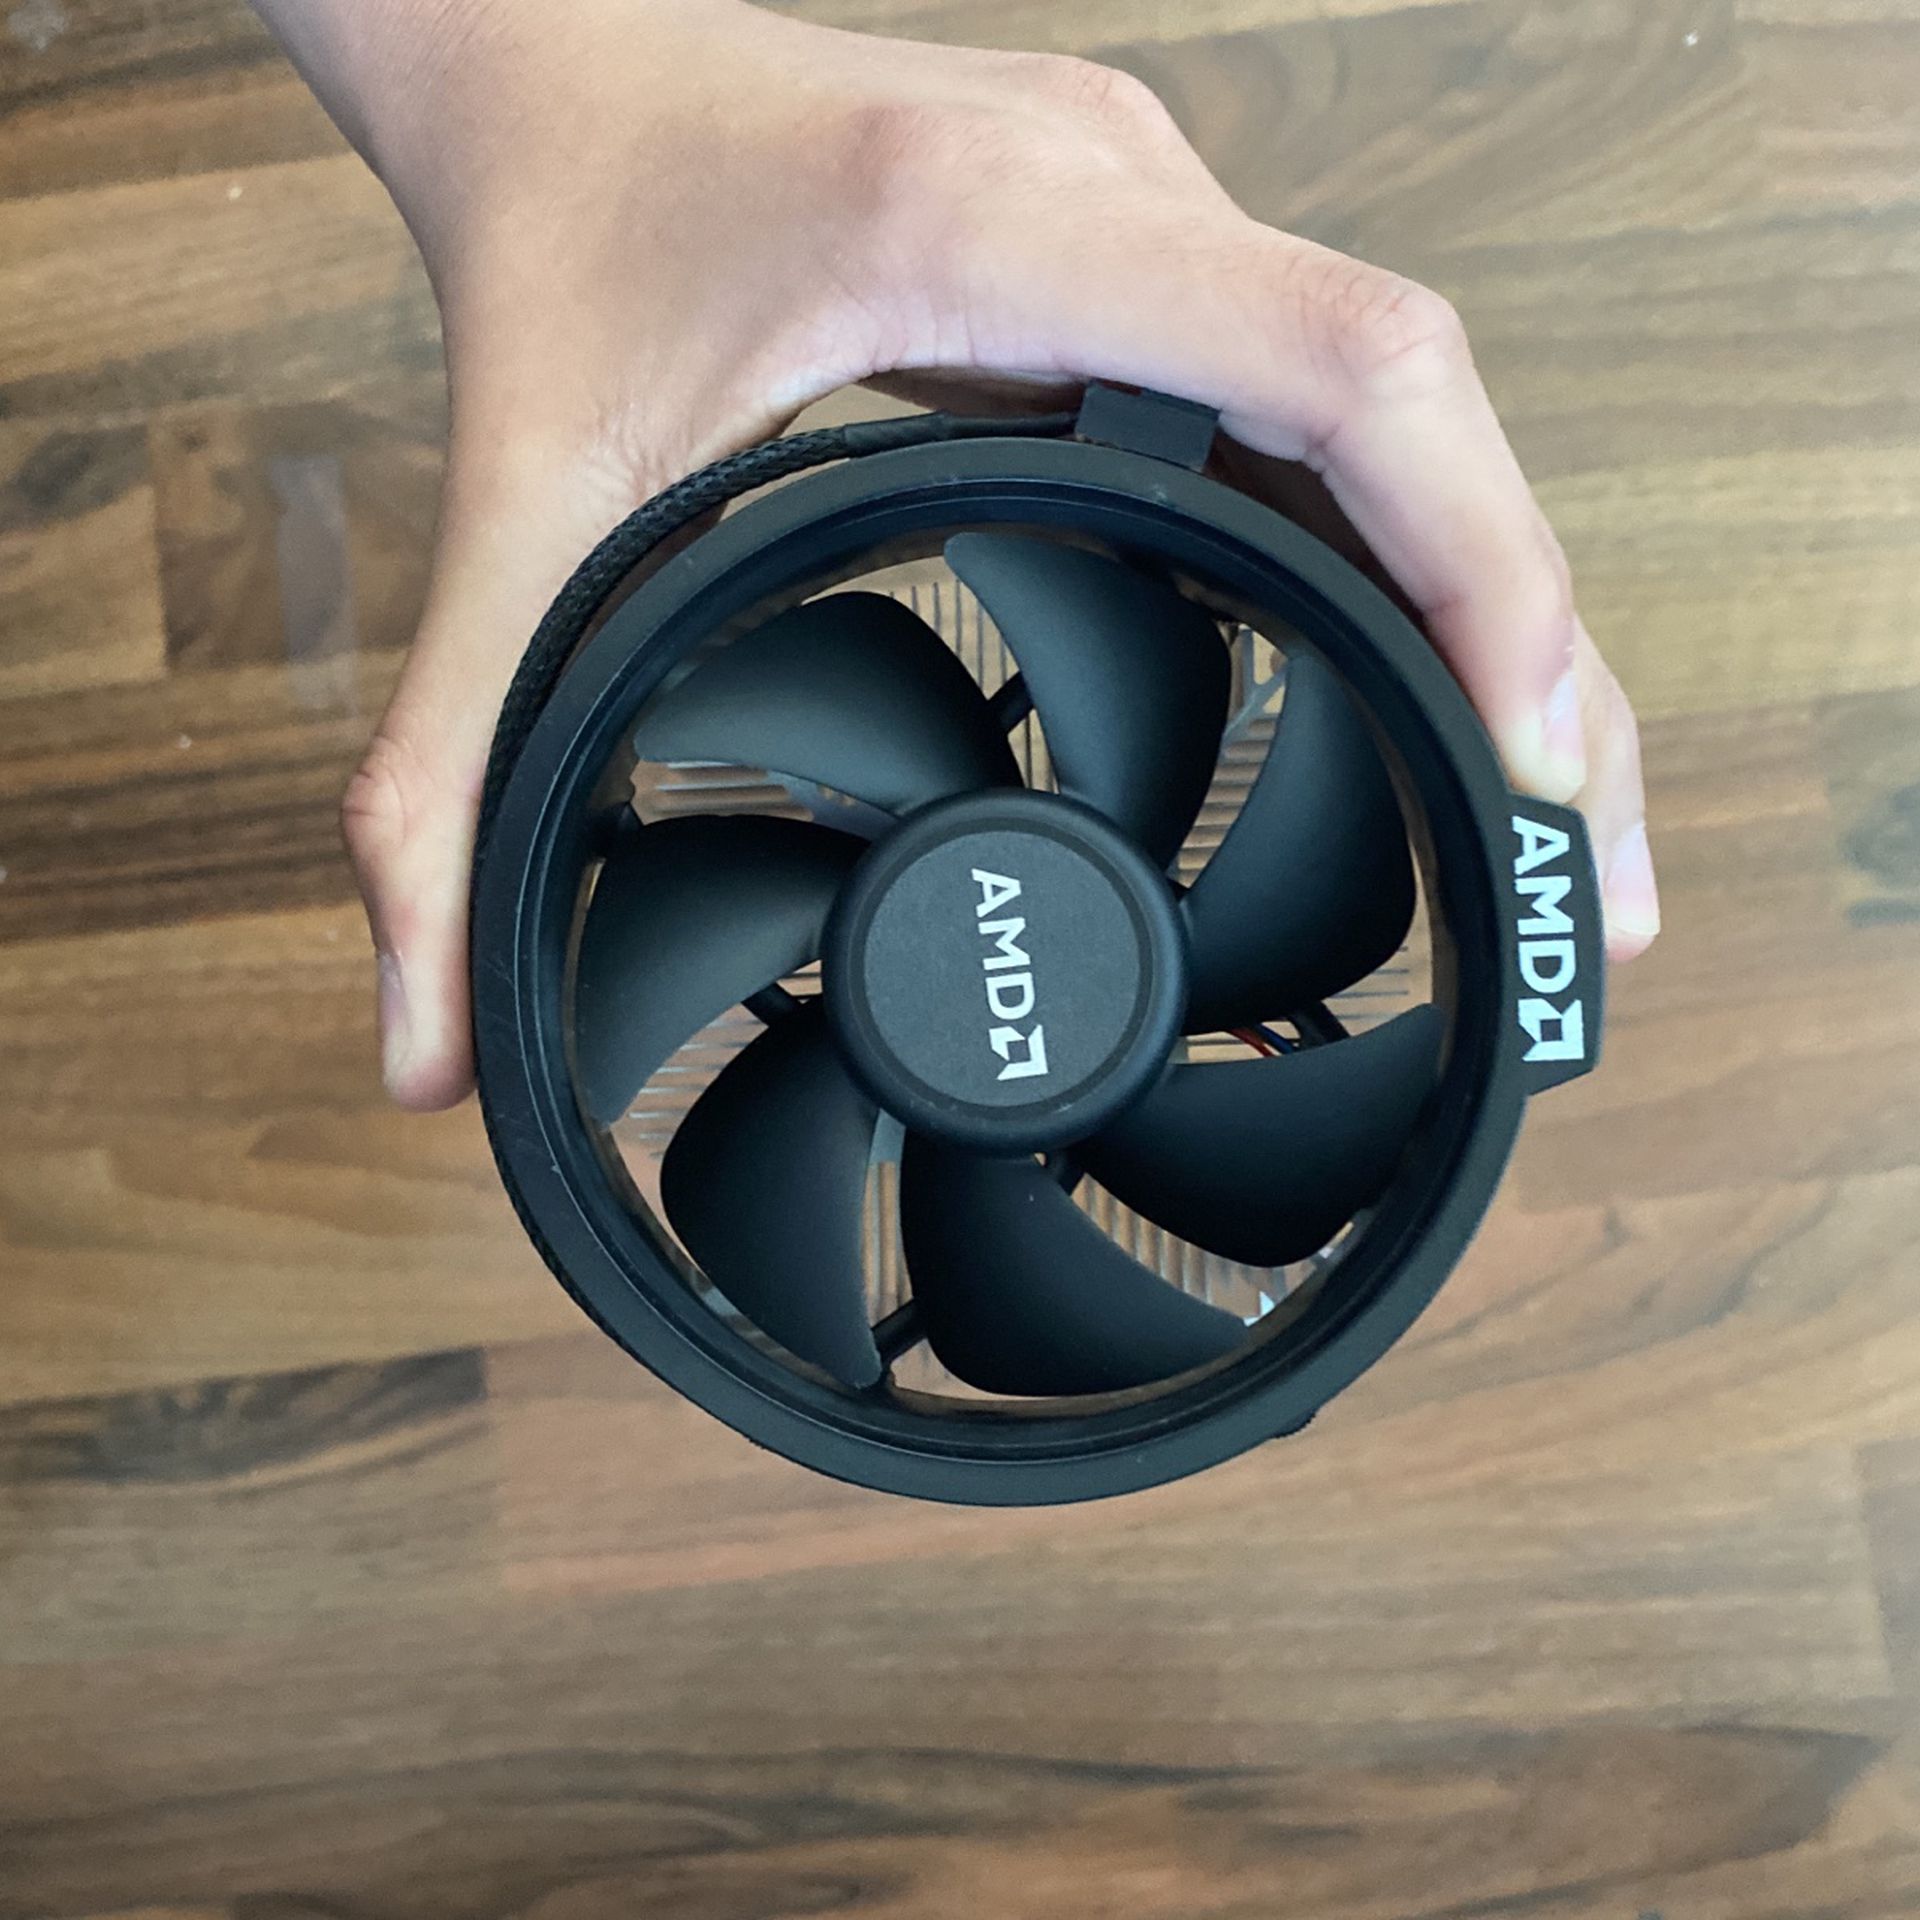 January produce Wednesday AMD Wraith Stealth CPU Cooler for Sale in Westlake Village, CA - OfferUp